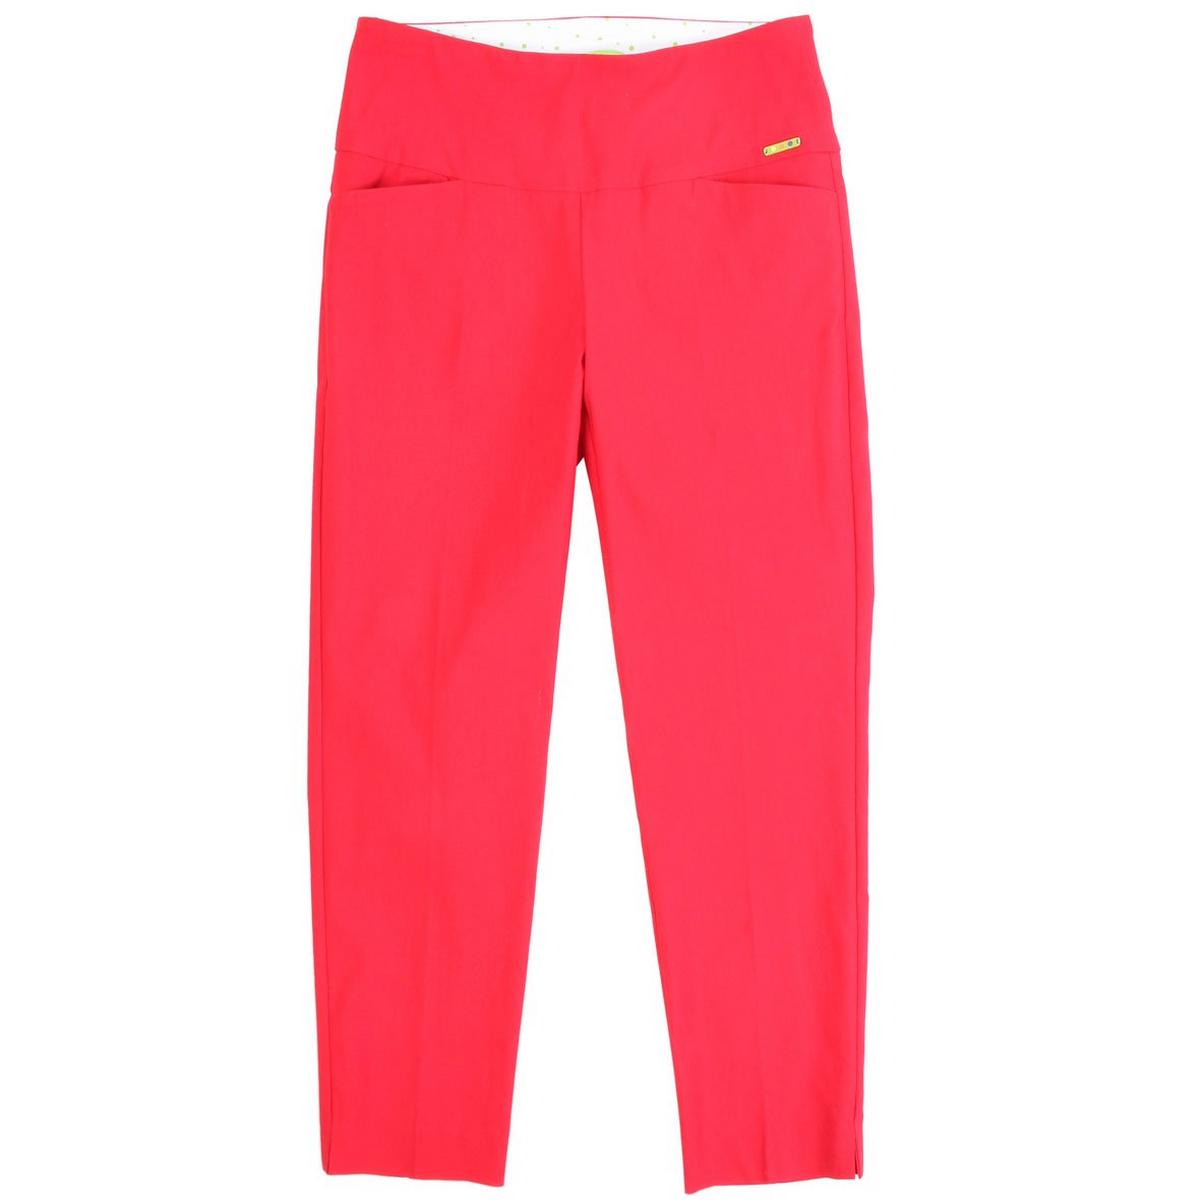 Women's Master Ankle Pant